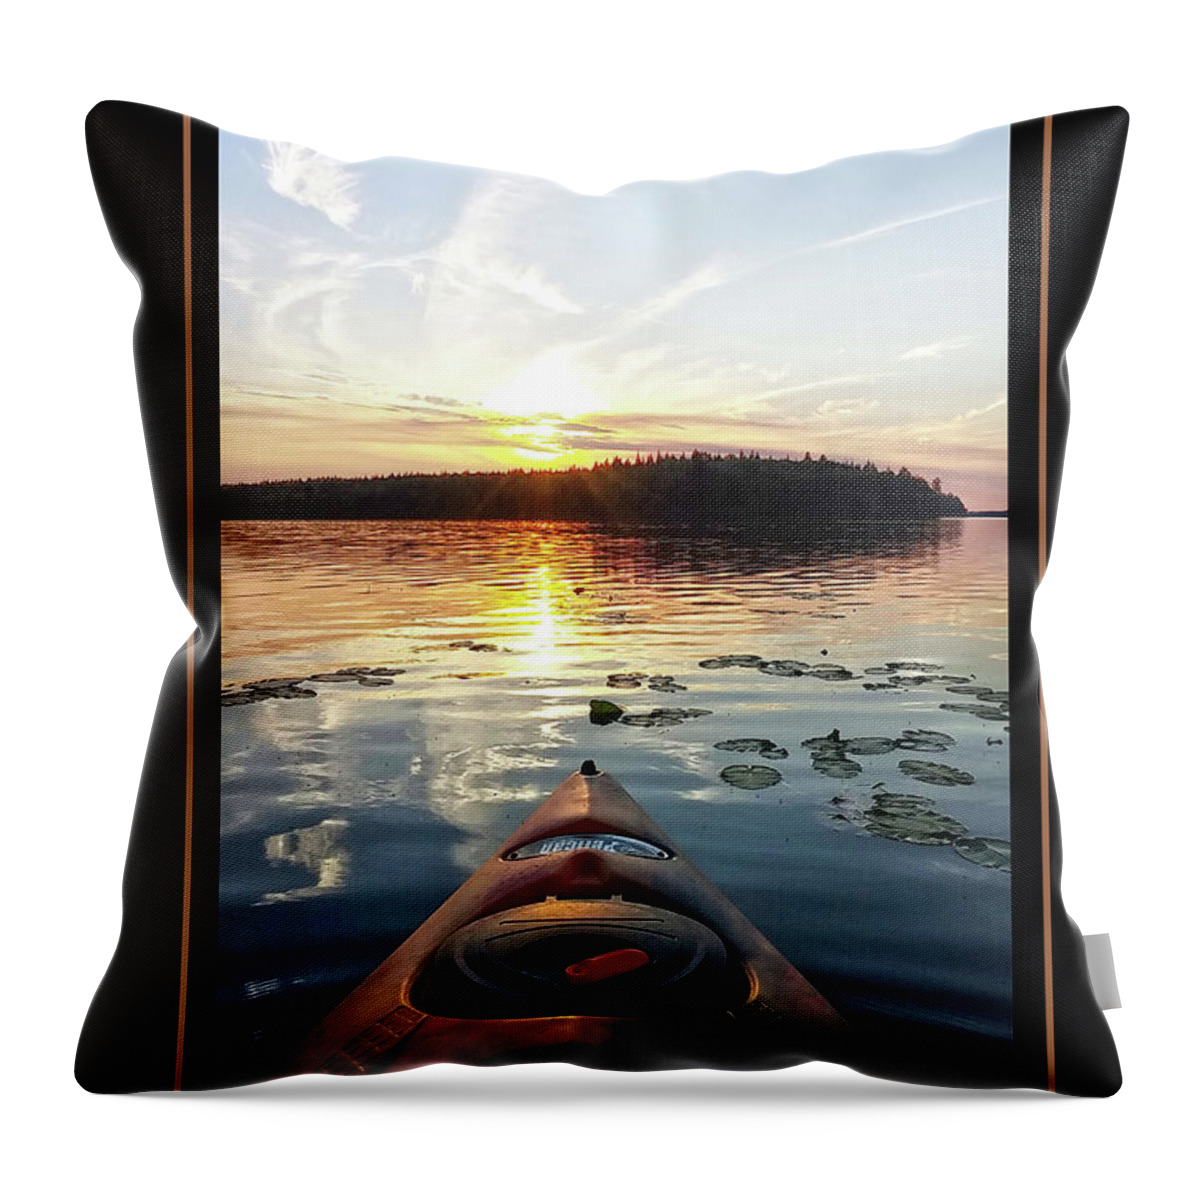 Lake Throw Pillow featuring the photograph Every Day Brings New Choices by Vivian Martin